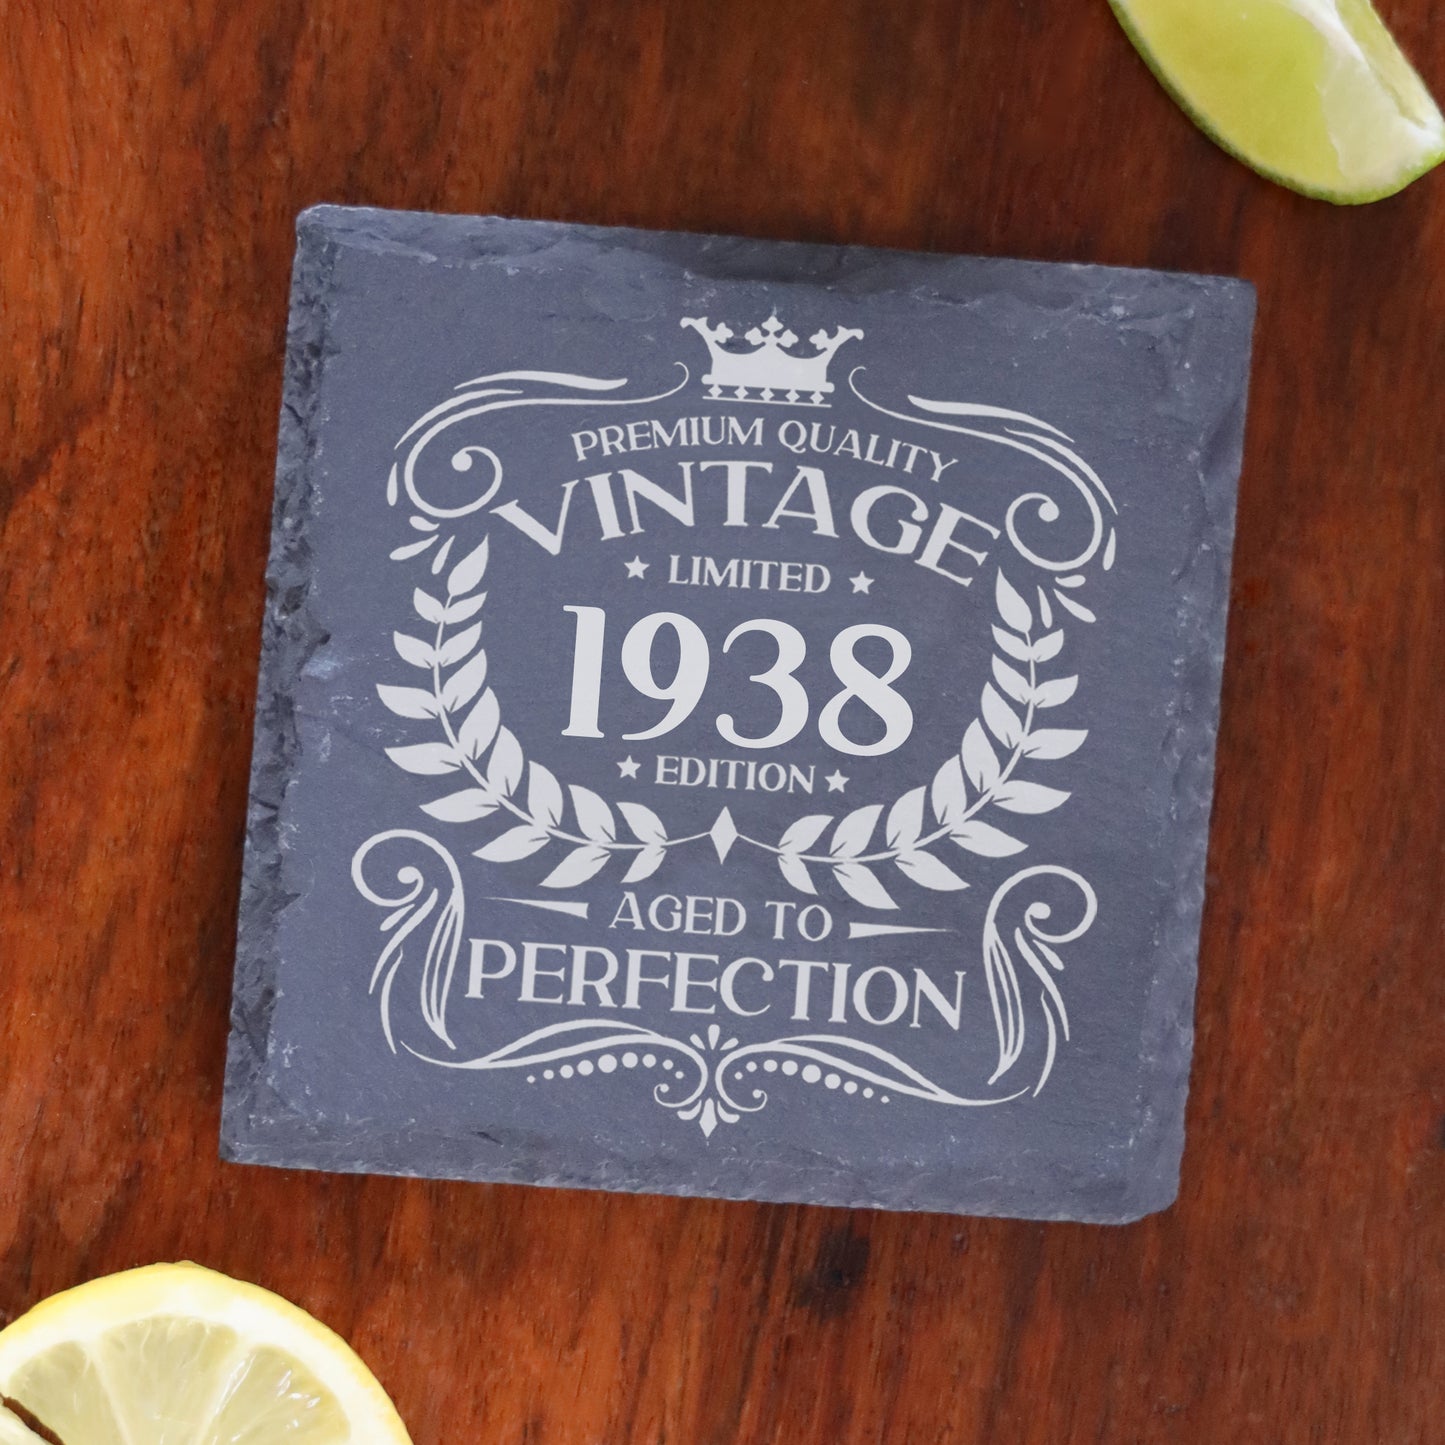 Personalised Vintage 1938 Mug and/or Coaster  - Always Looking Good - Square Coaster On Its Own  